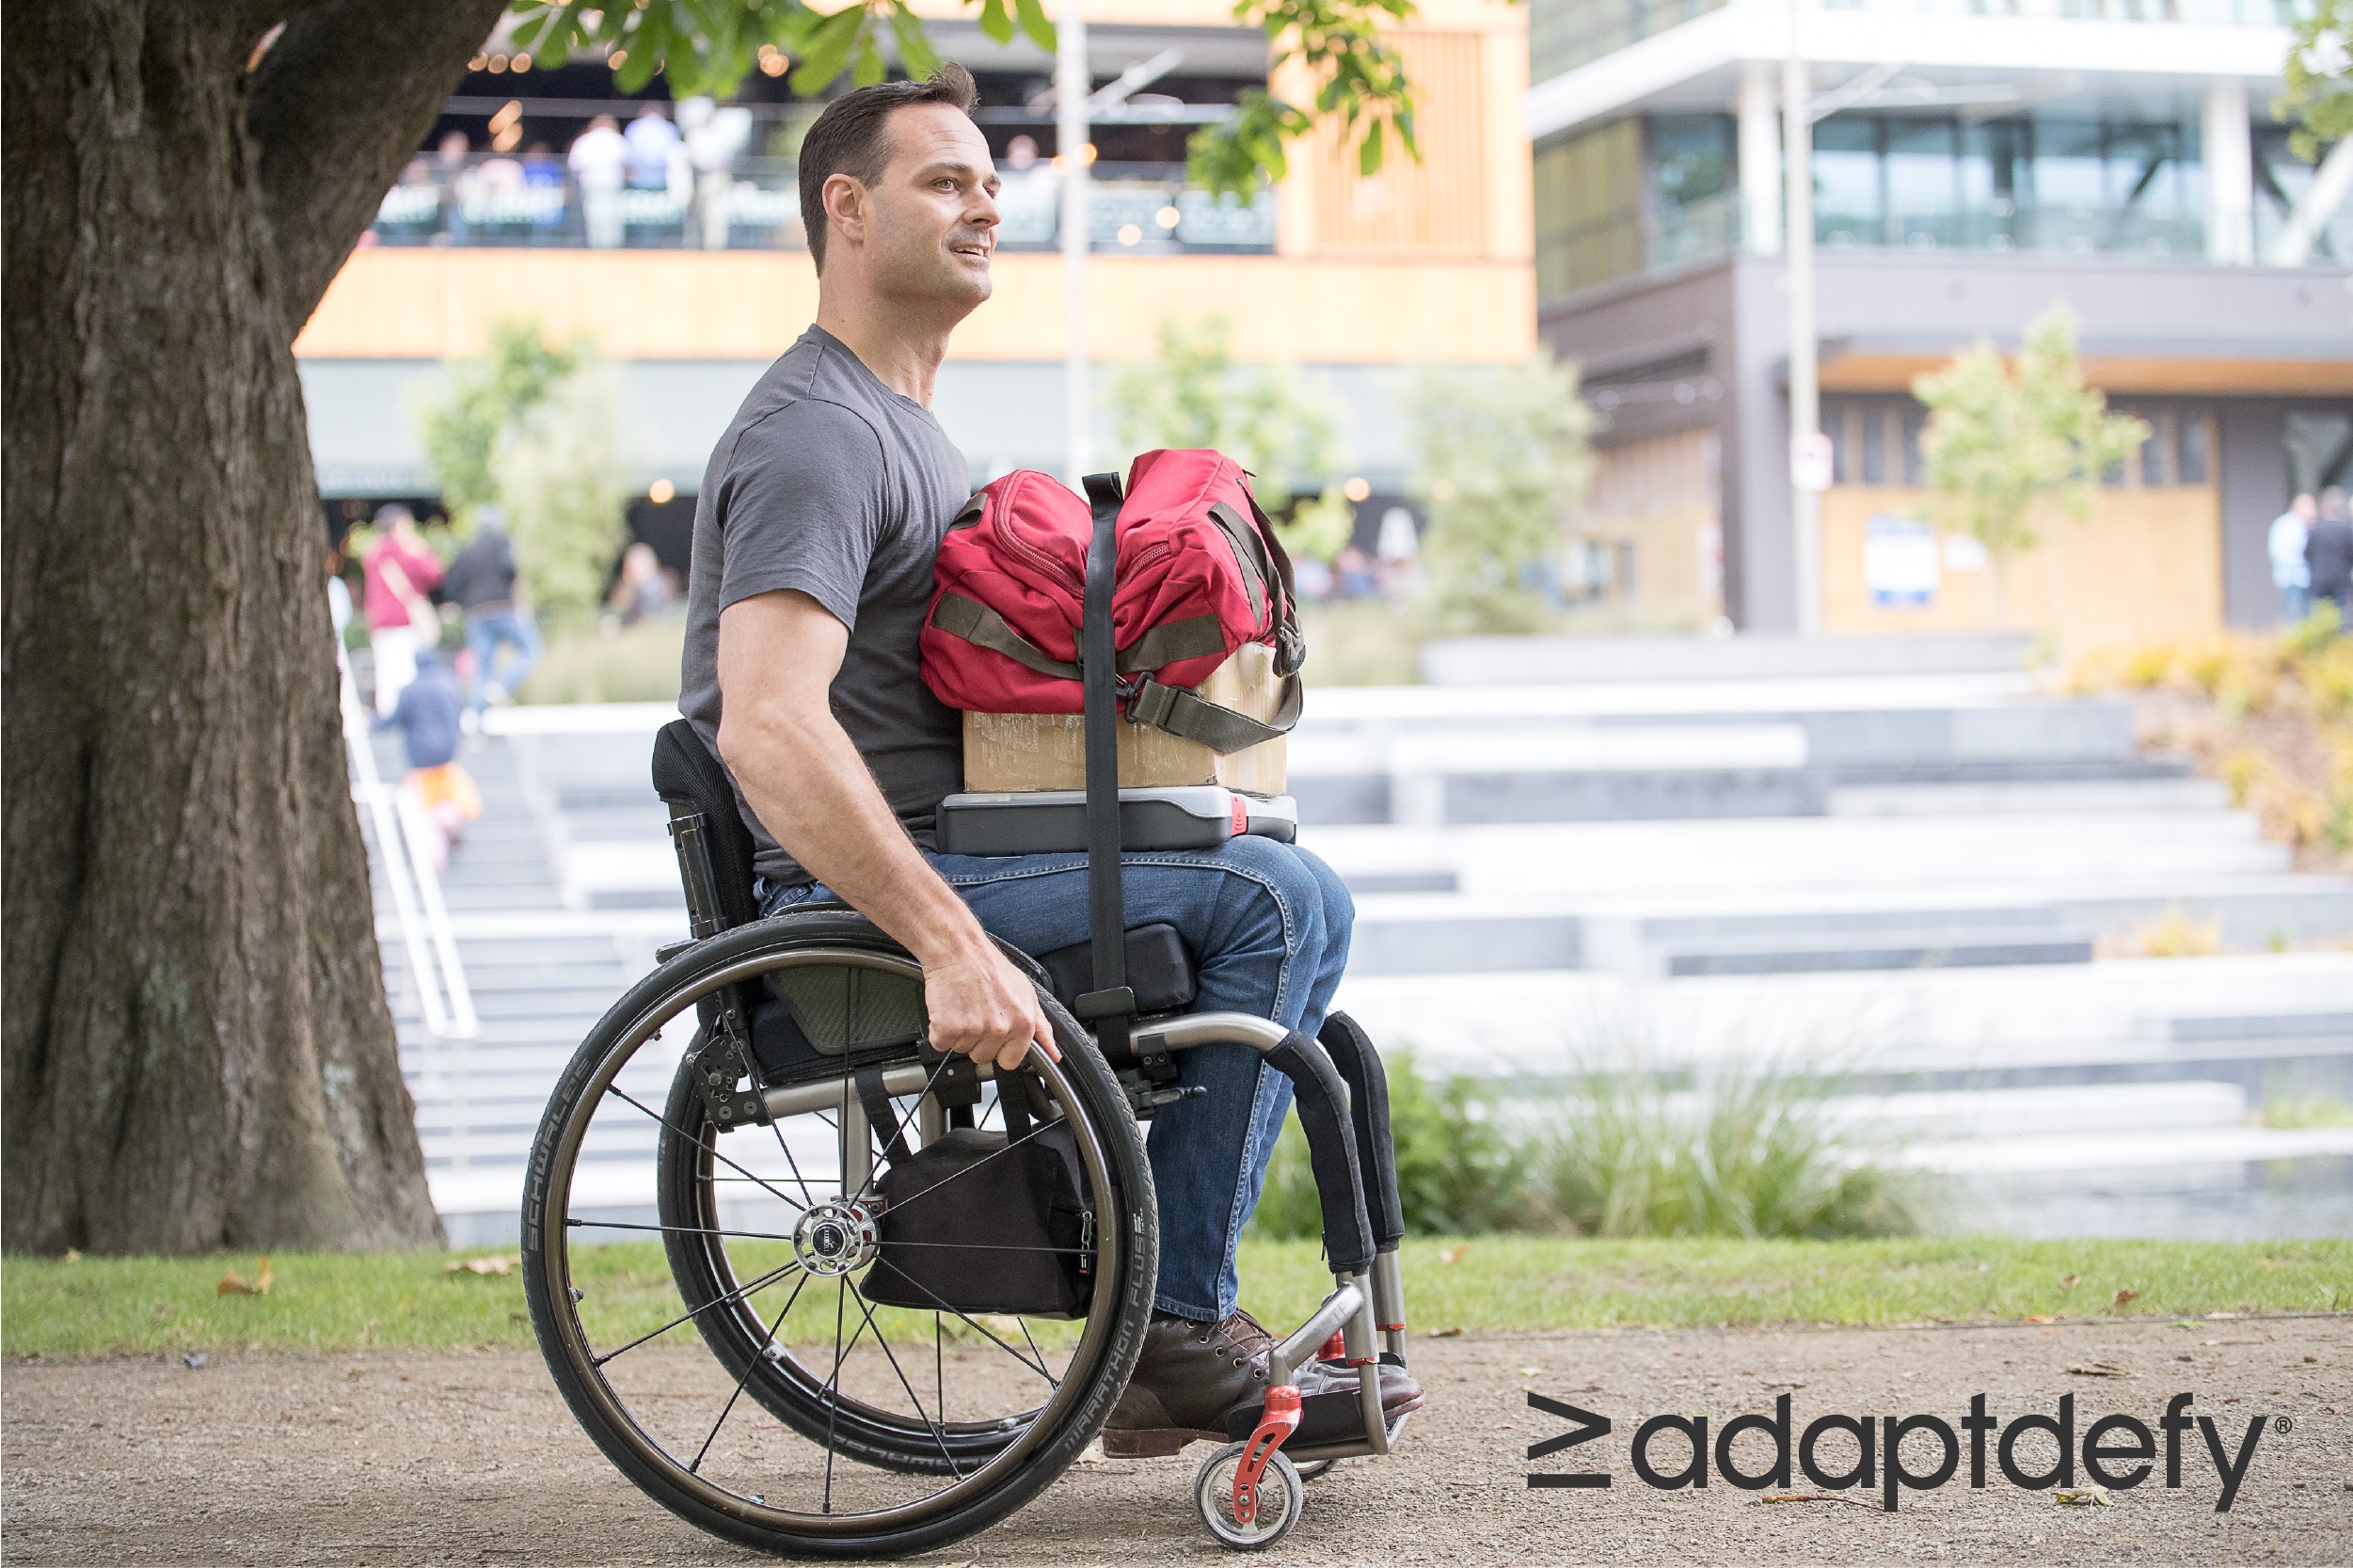 Man in manual wheelchair using carrying device to secure a bag and other items to his lap while pushing